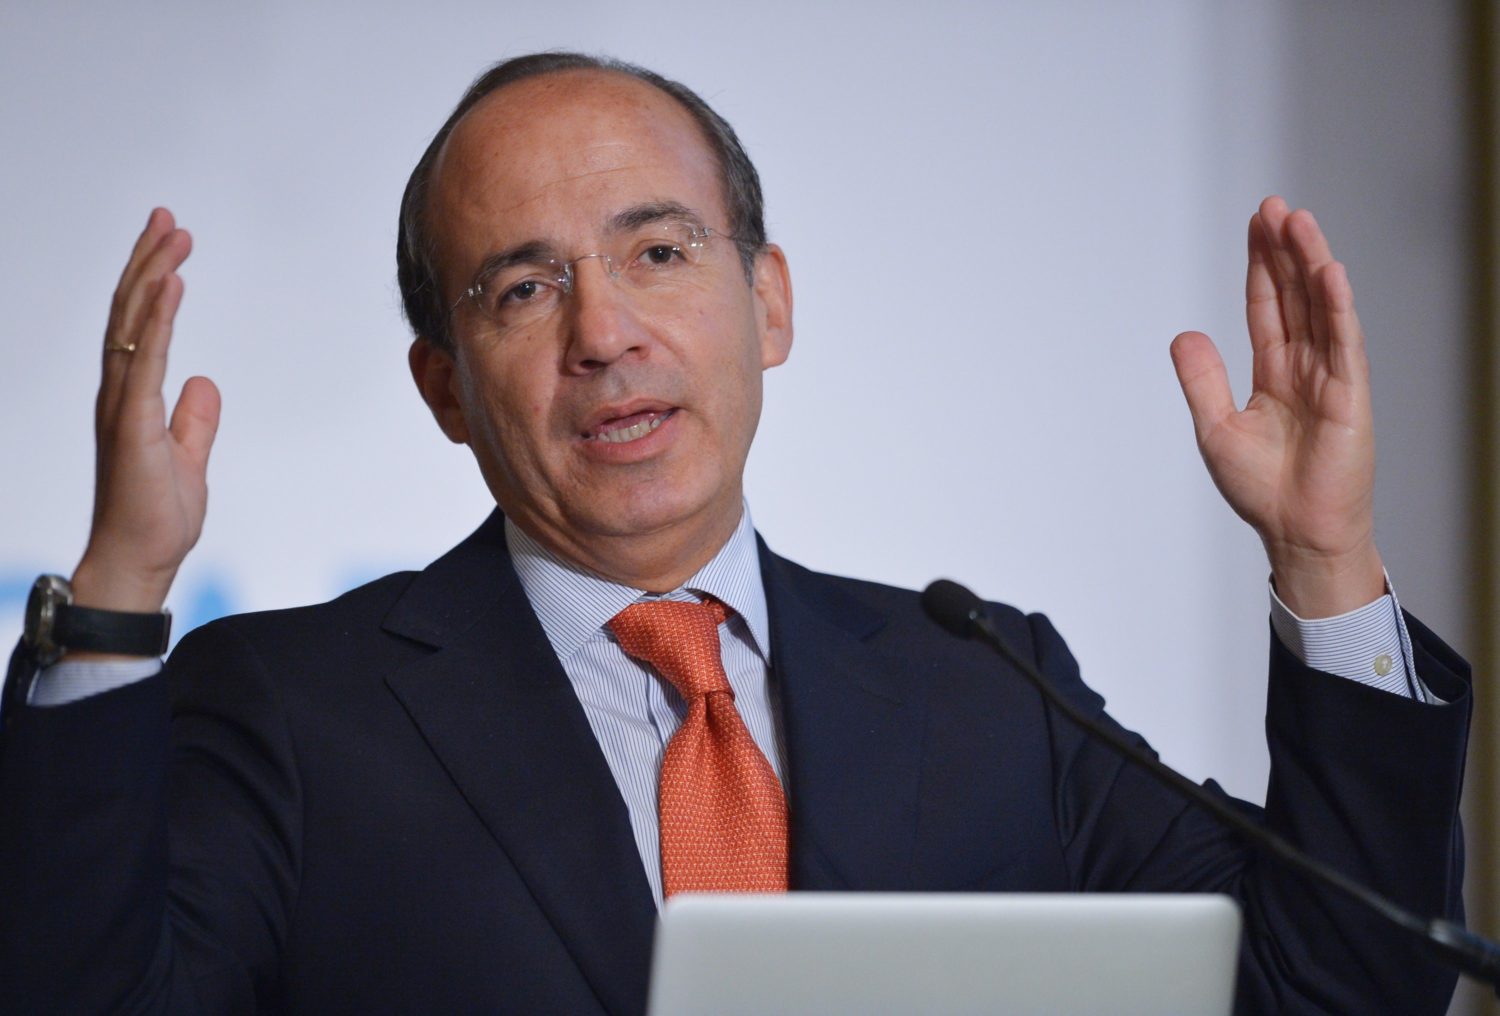 Former Mexican president Felipe Calderon delivers the keynote address during the 18th annual CAF, Development Bank of Latin America conference on September 3, 2014  in Washington, DC. AFP PHOTO/Mandel NGAN        (Photo credit should read MANDEL NGAN/AFP/Getty Images)